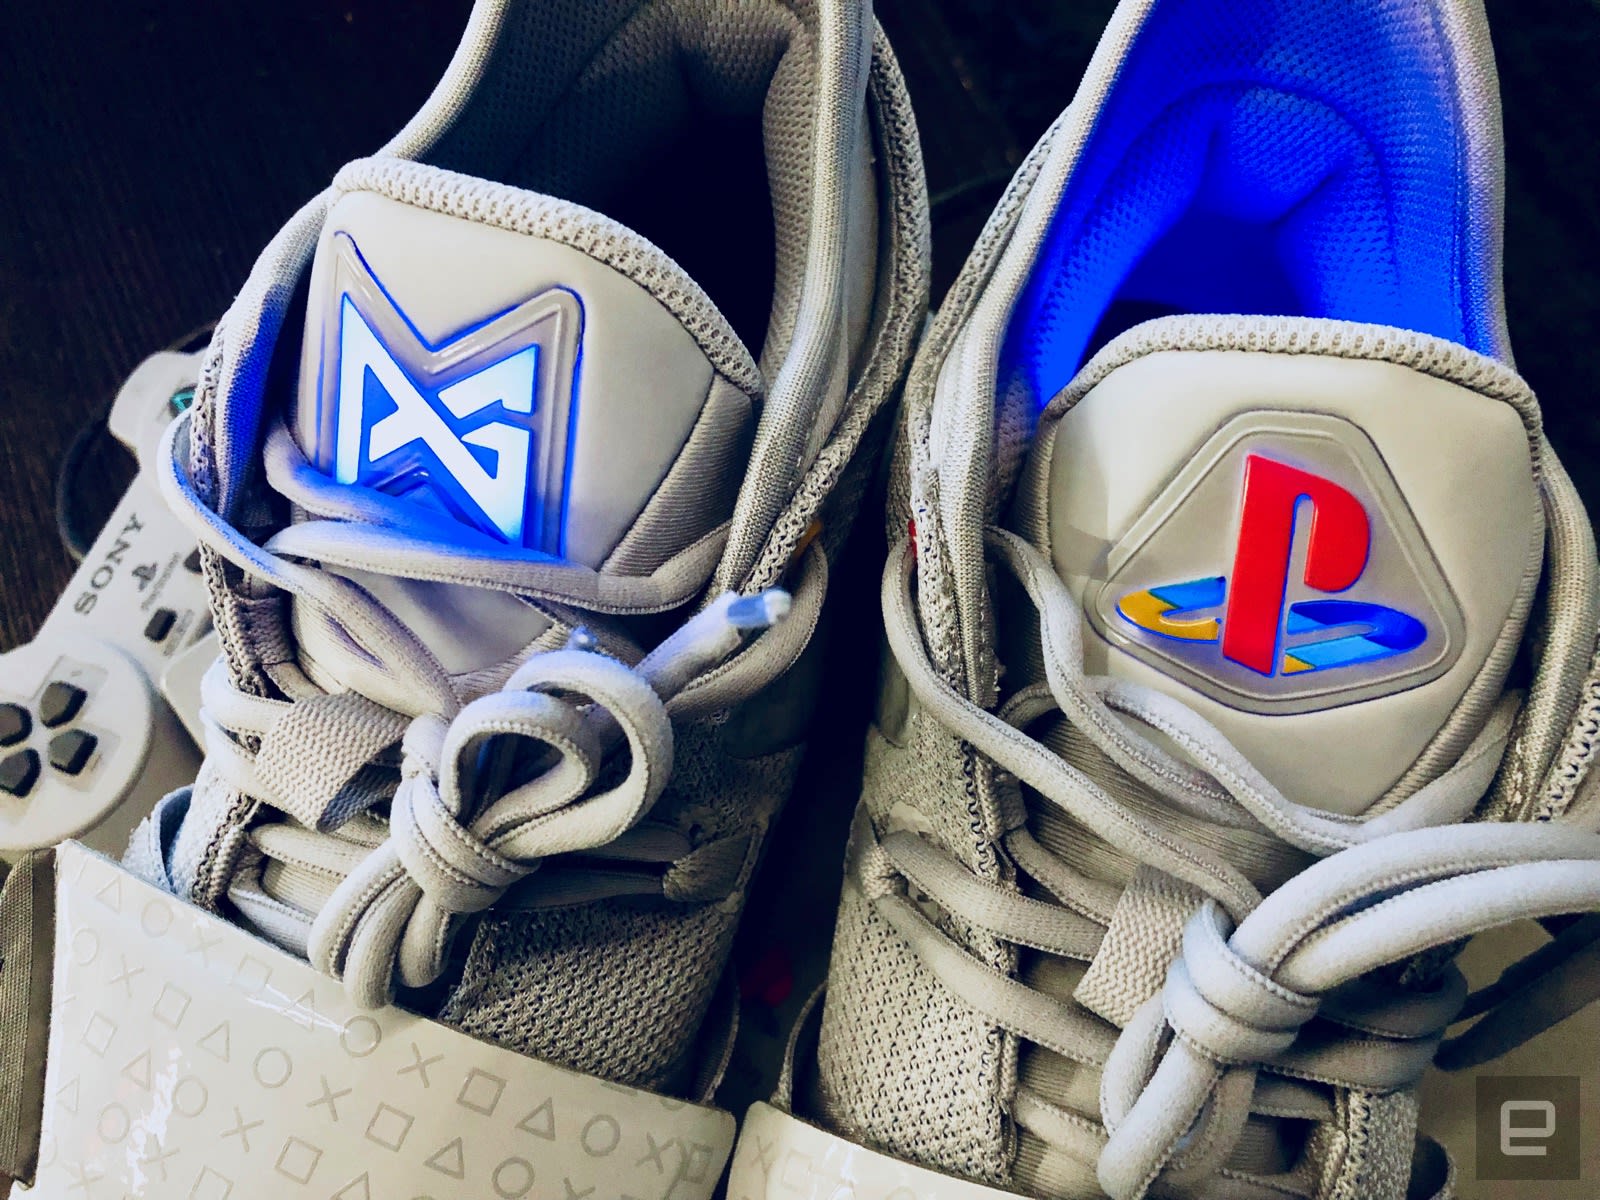 Nike's new PlayStation sneakers pay to console | Engadget